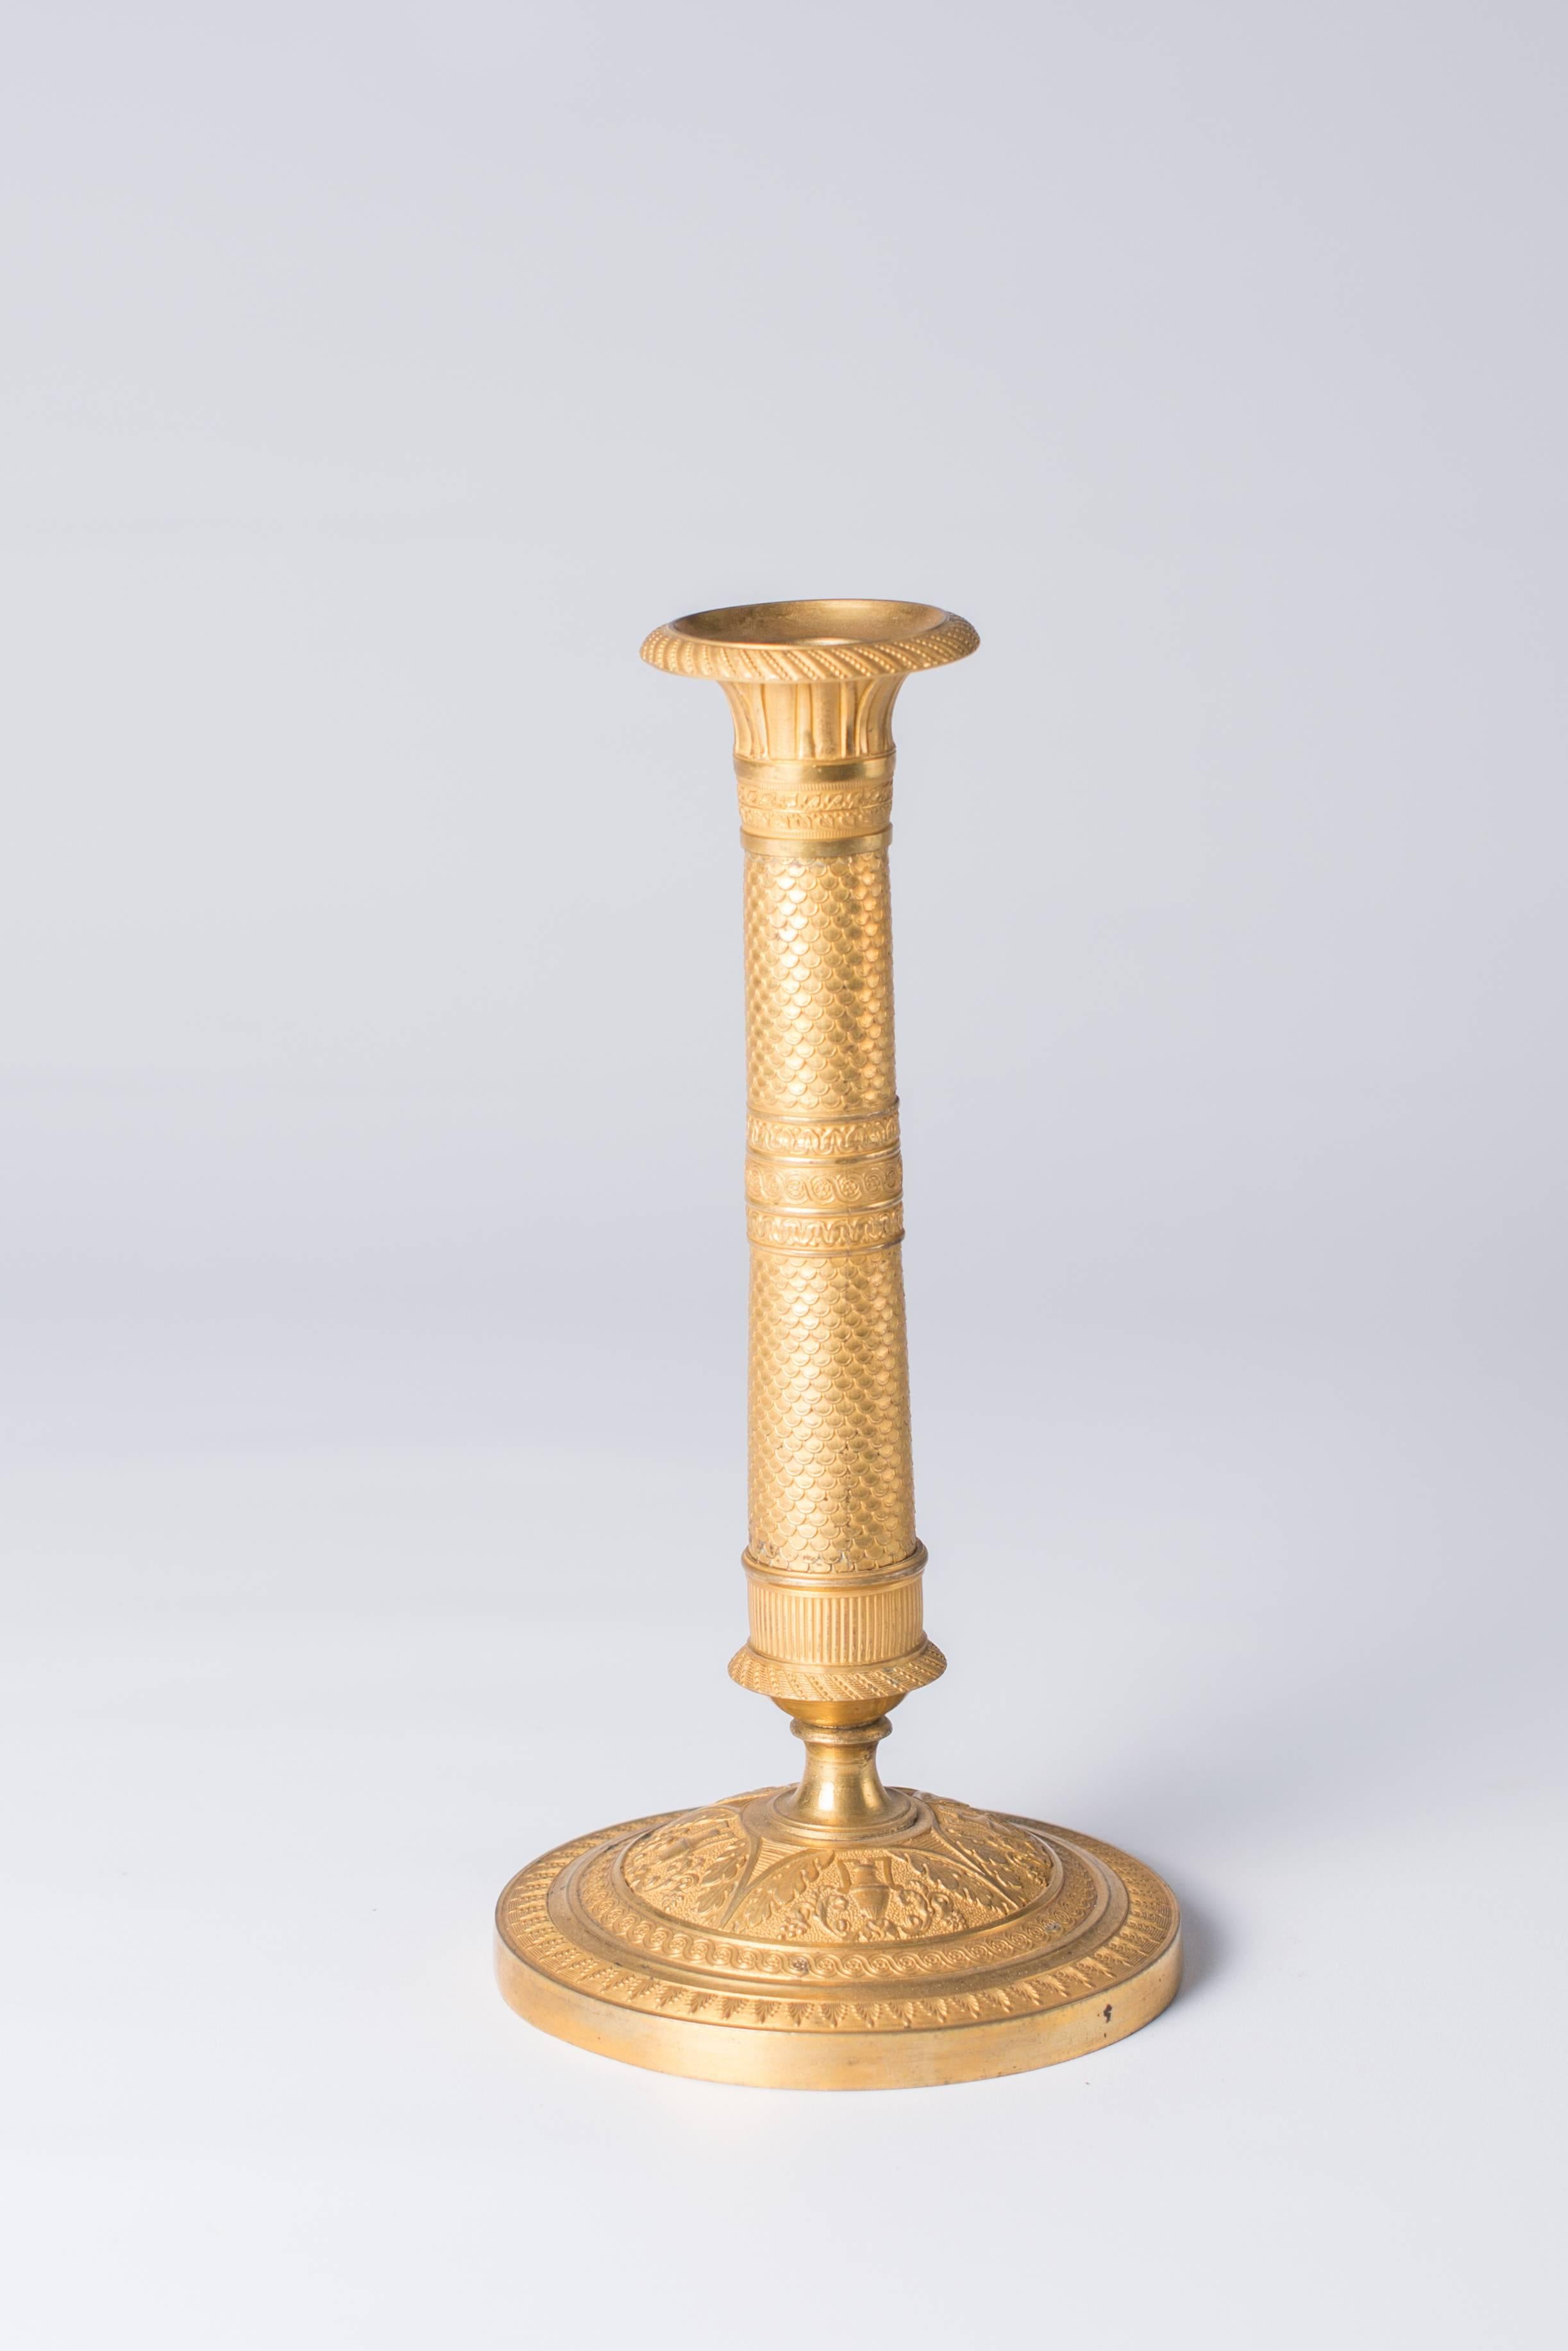 This pair of candlesticks are in gilt bronze. Each on a circular low domed base with a tapering stem and spreading candleholder with guilloché and stylized foliate cast decoration.
France, epoque Empire, 1810-1820.
This pair will lighten your